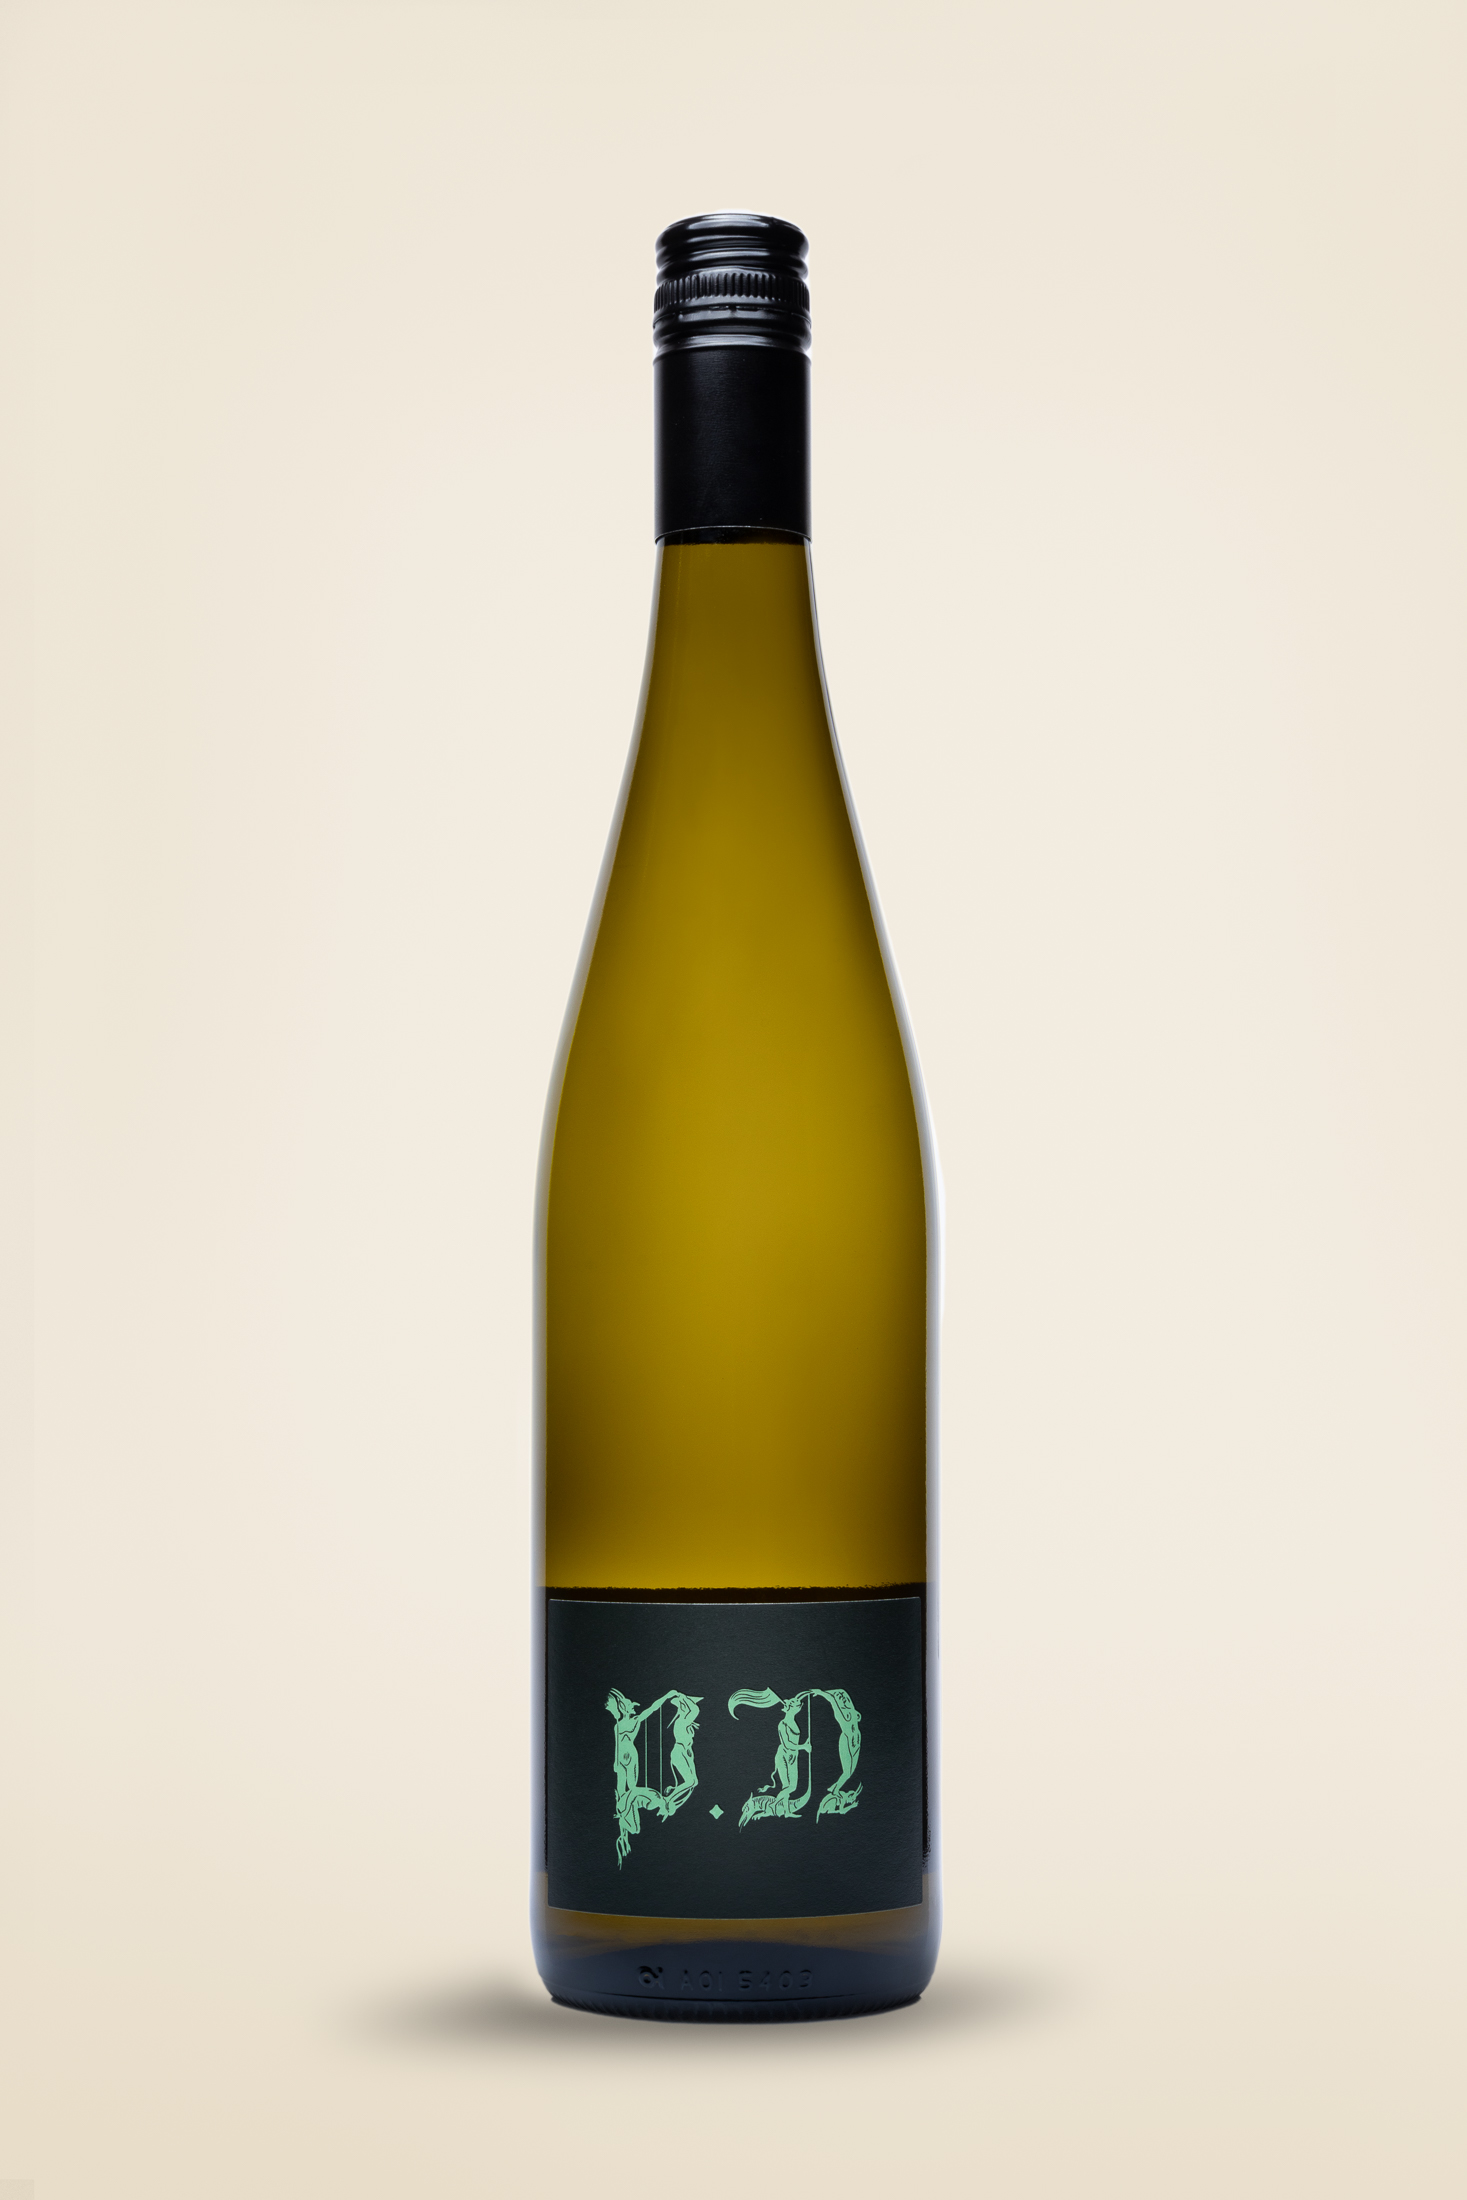 Paul nelson Riesling